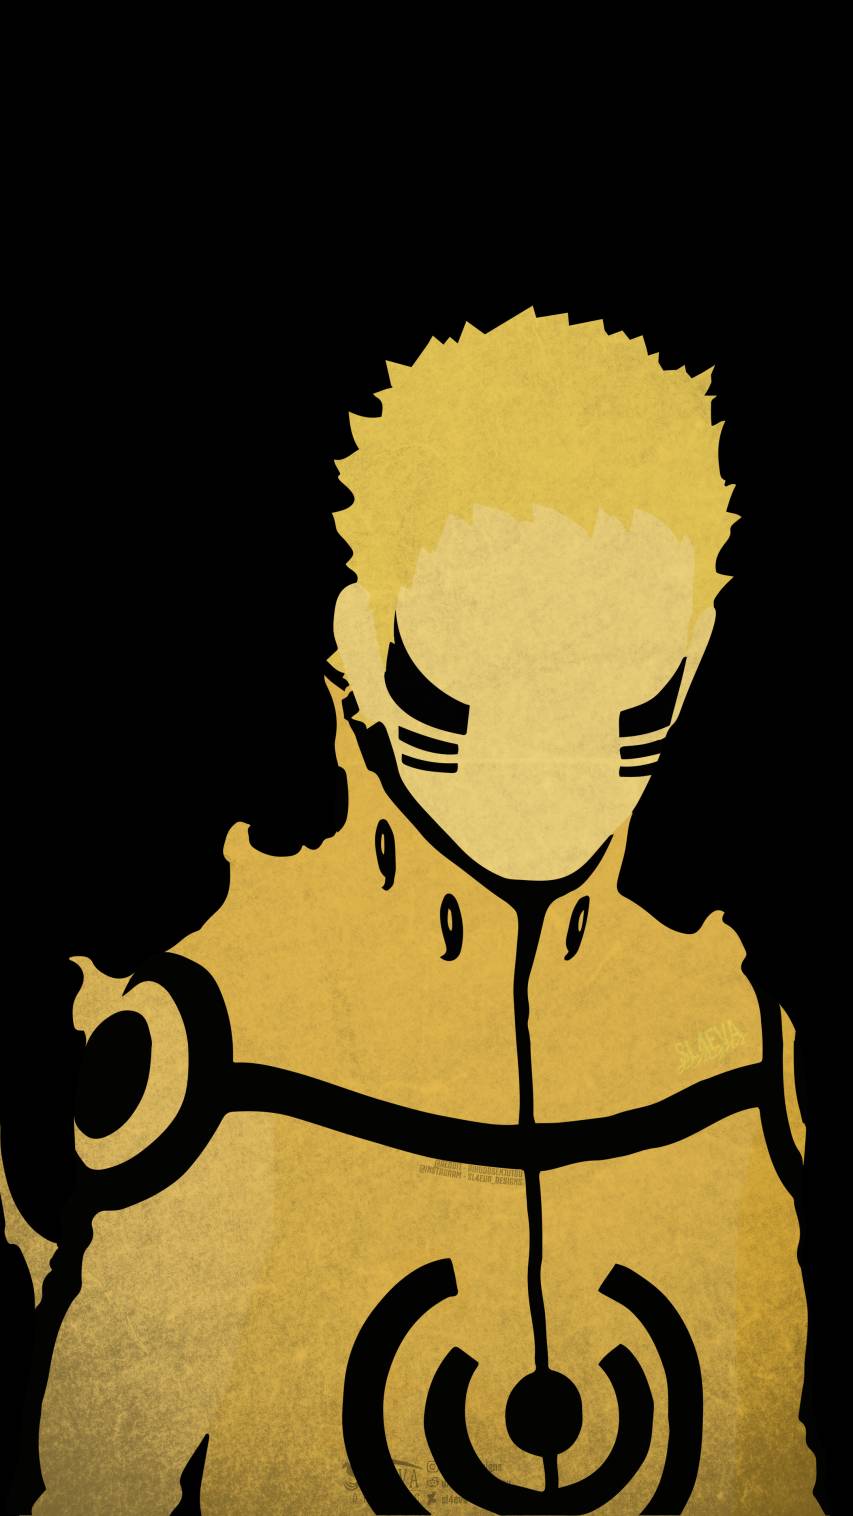 Naruto Wallpapers for iPhone and Android Devices